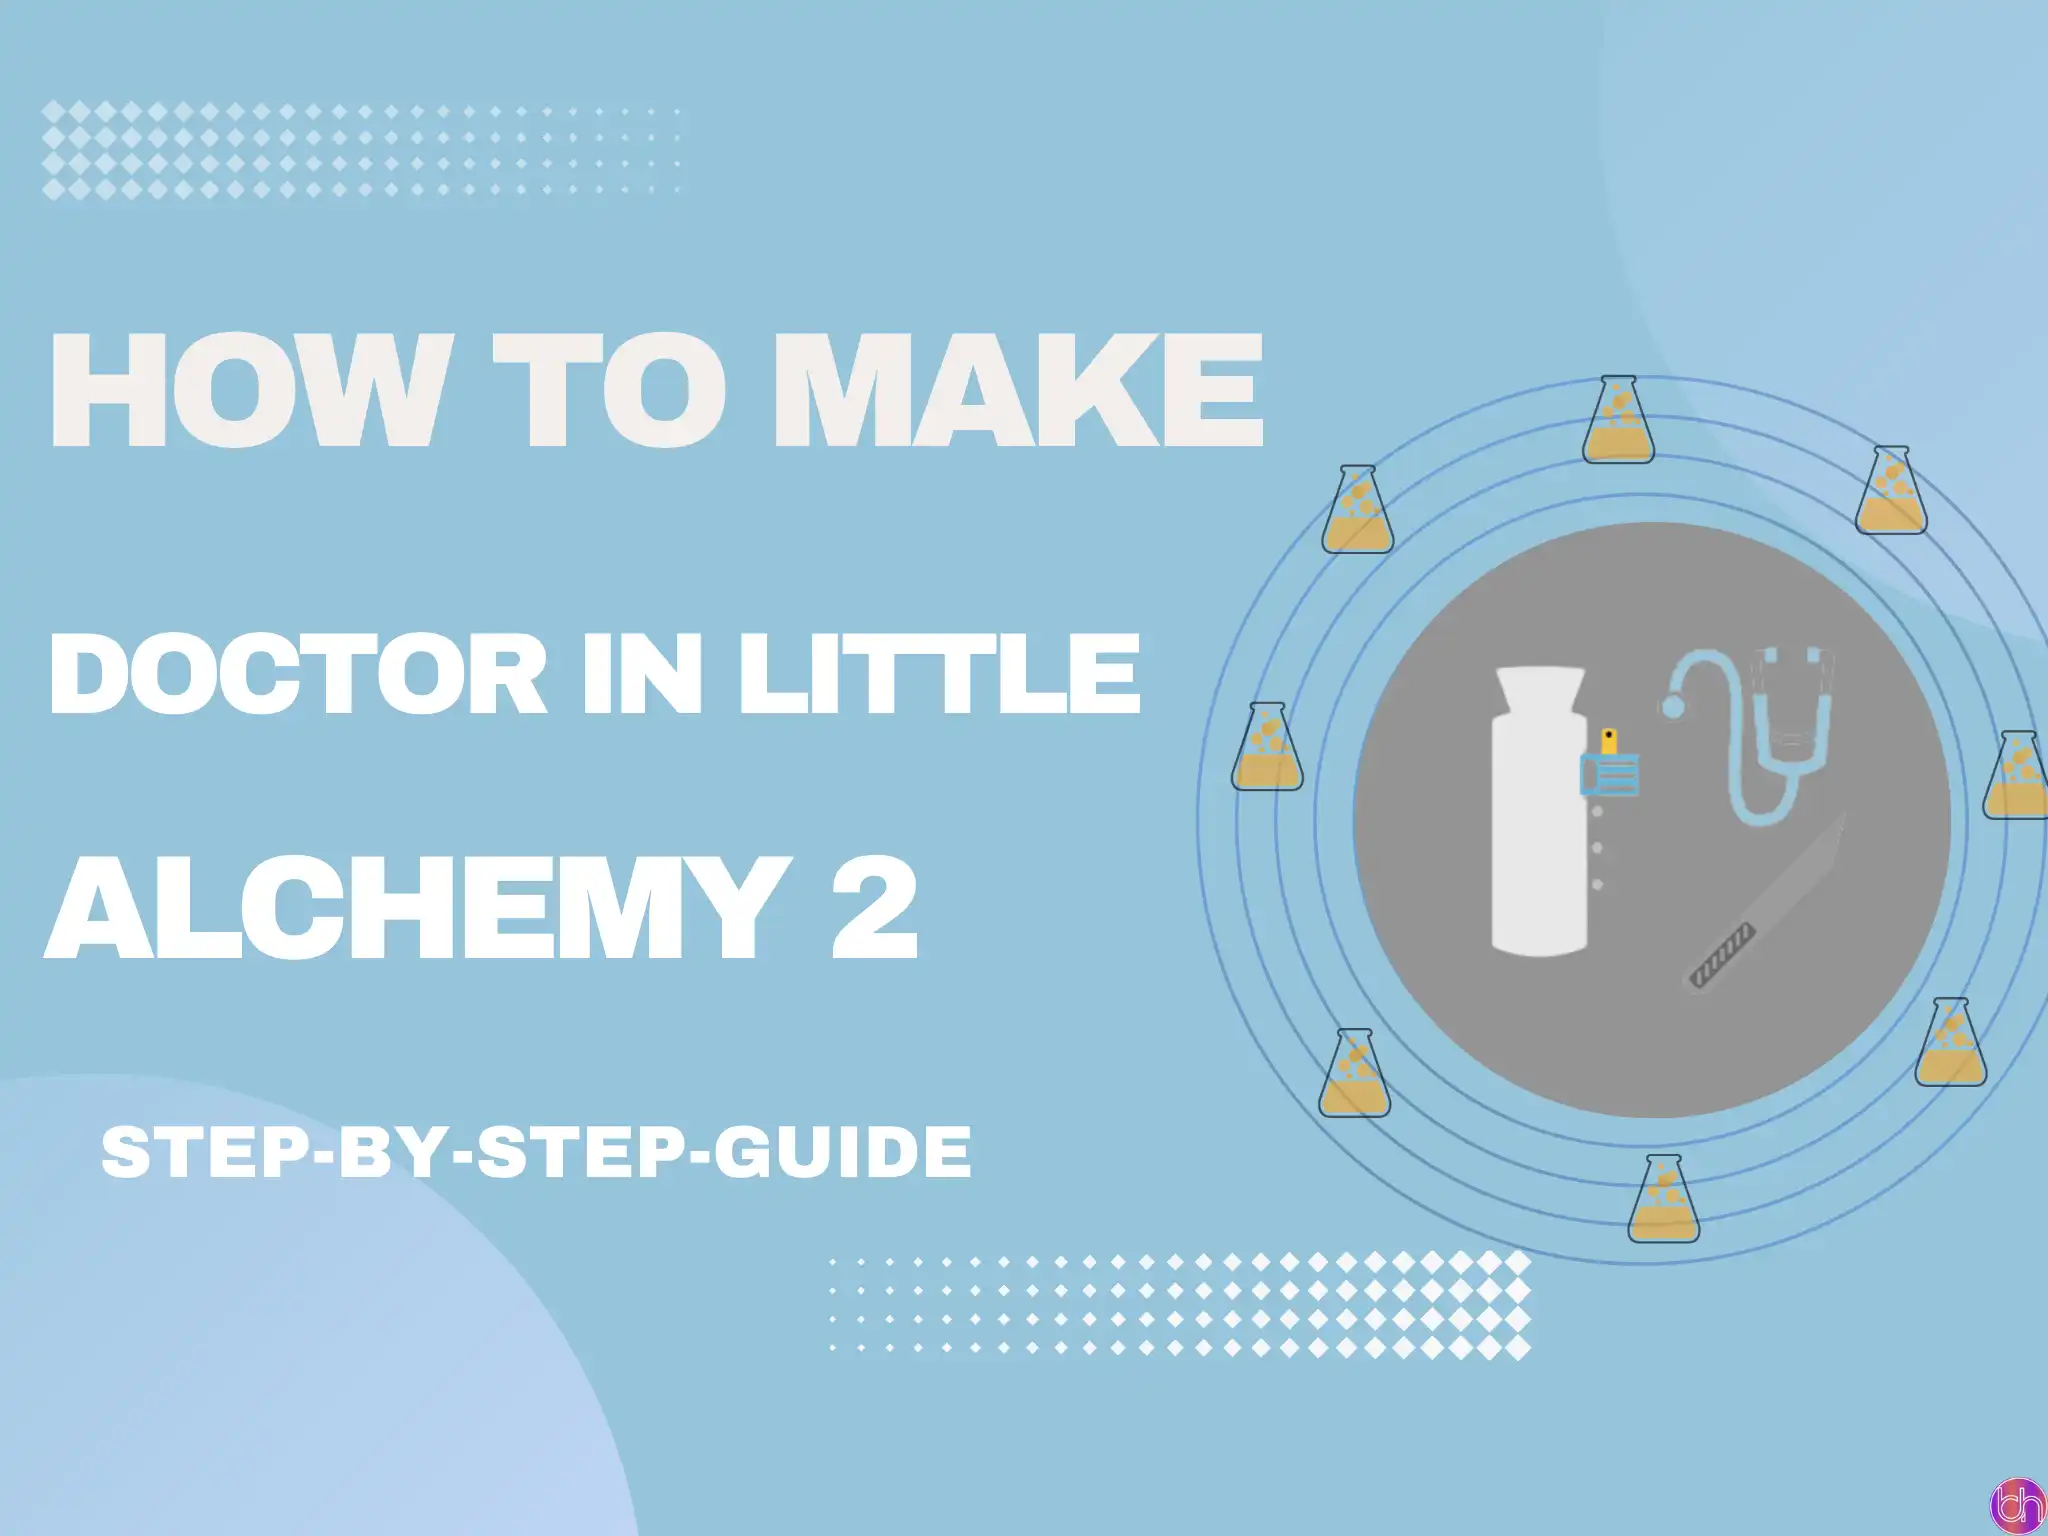 How to make Doctor in Little Alchemy 2